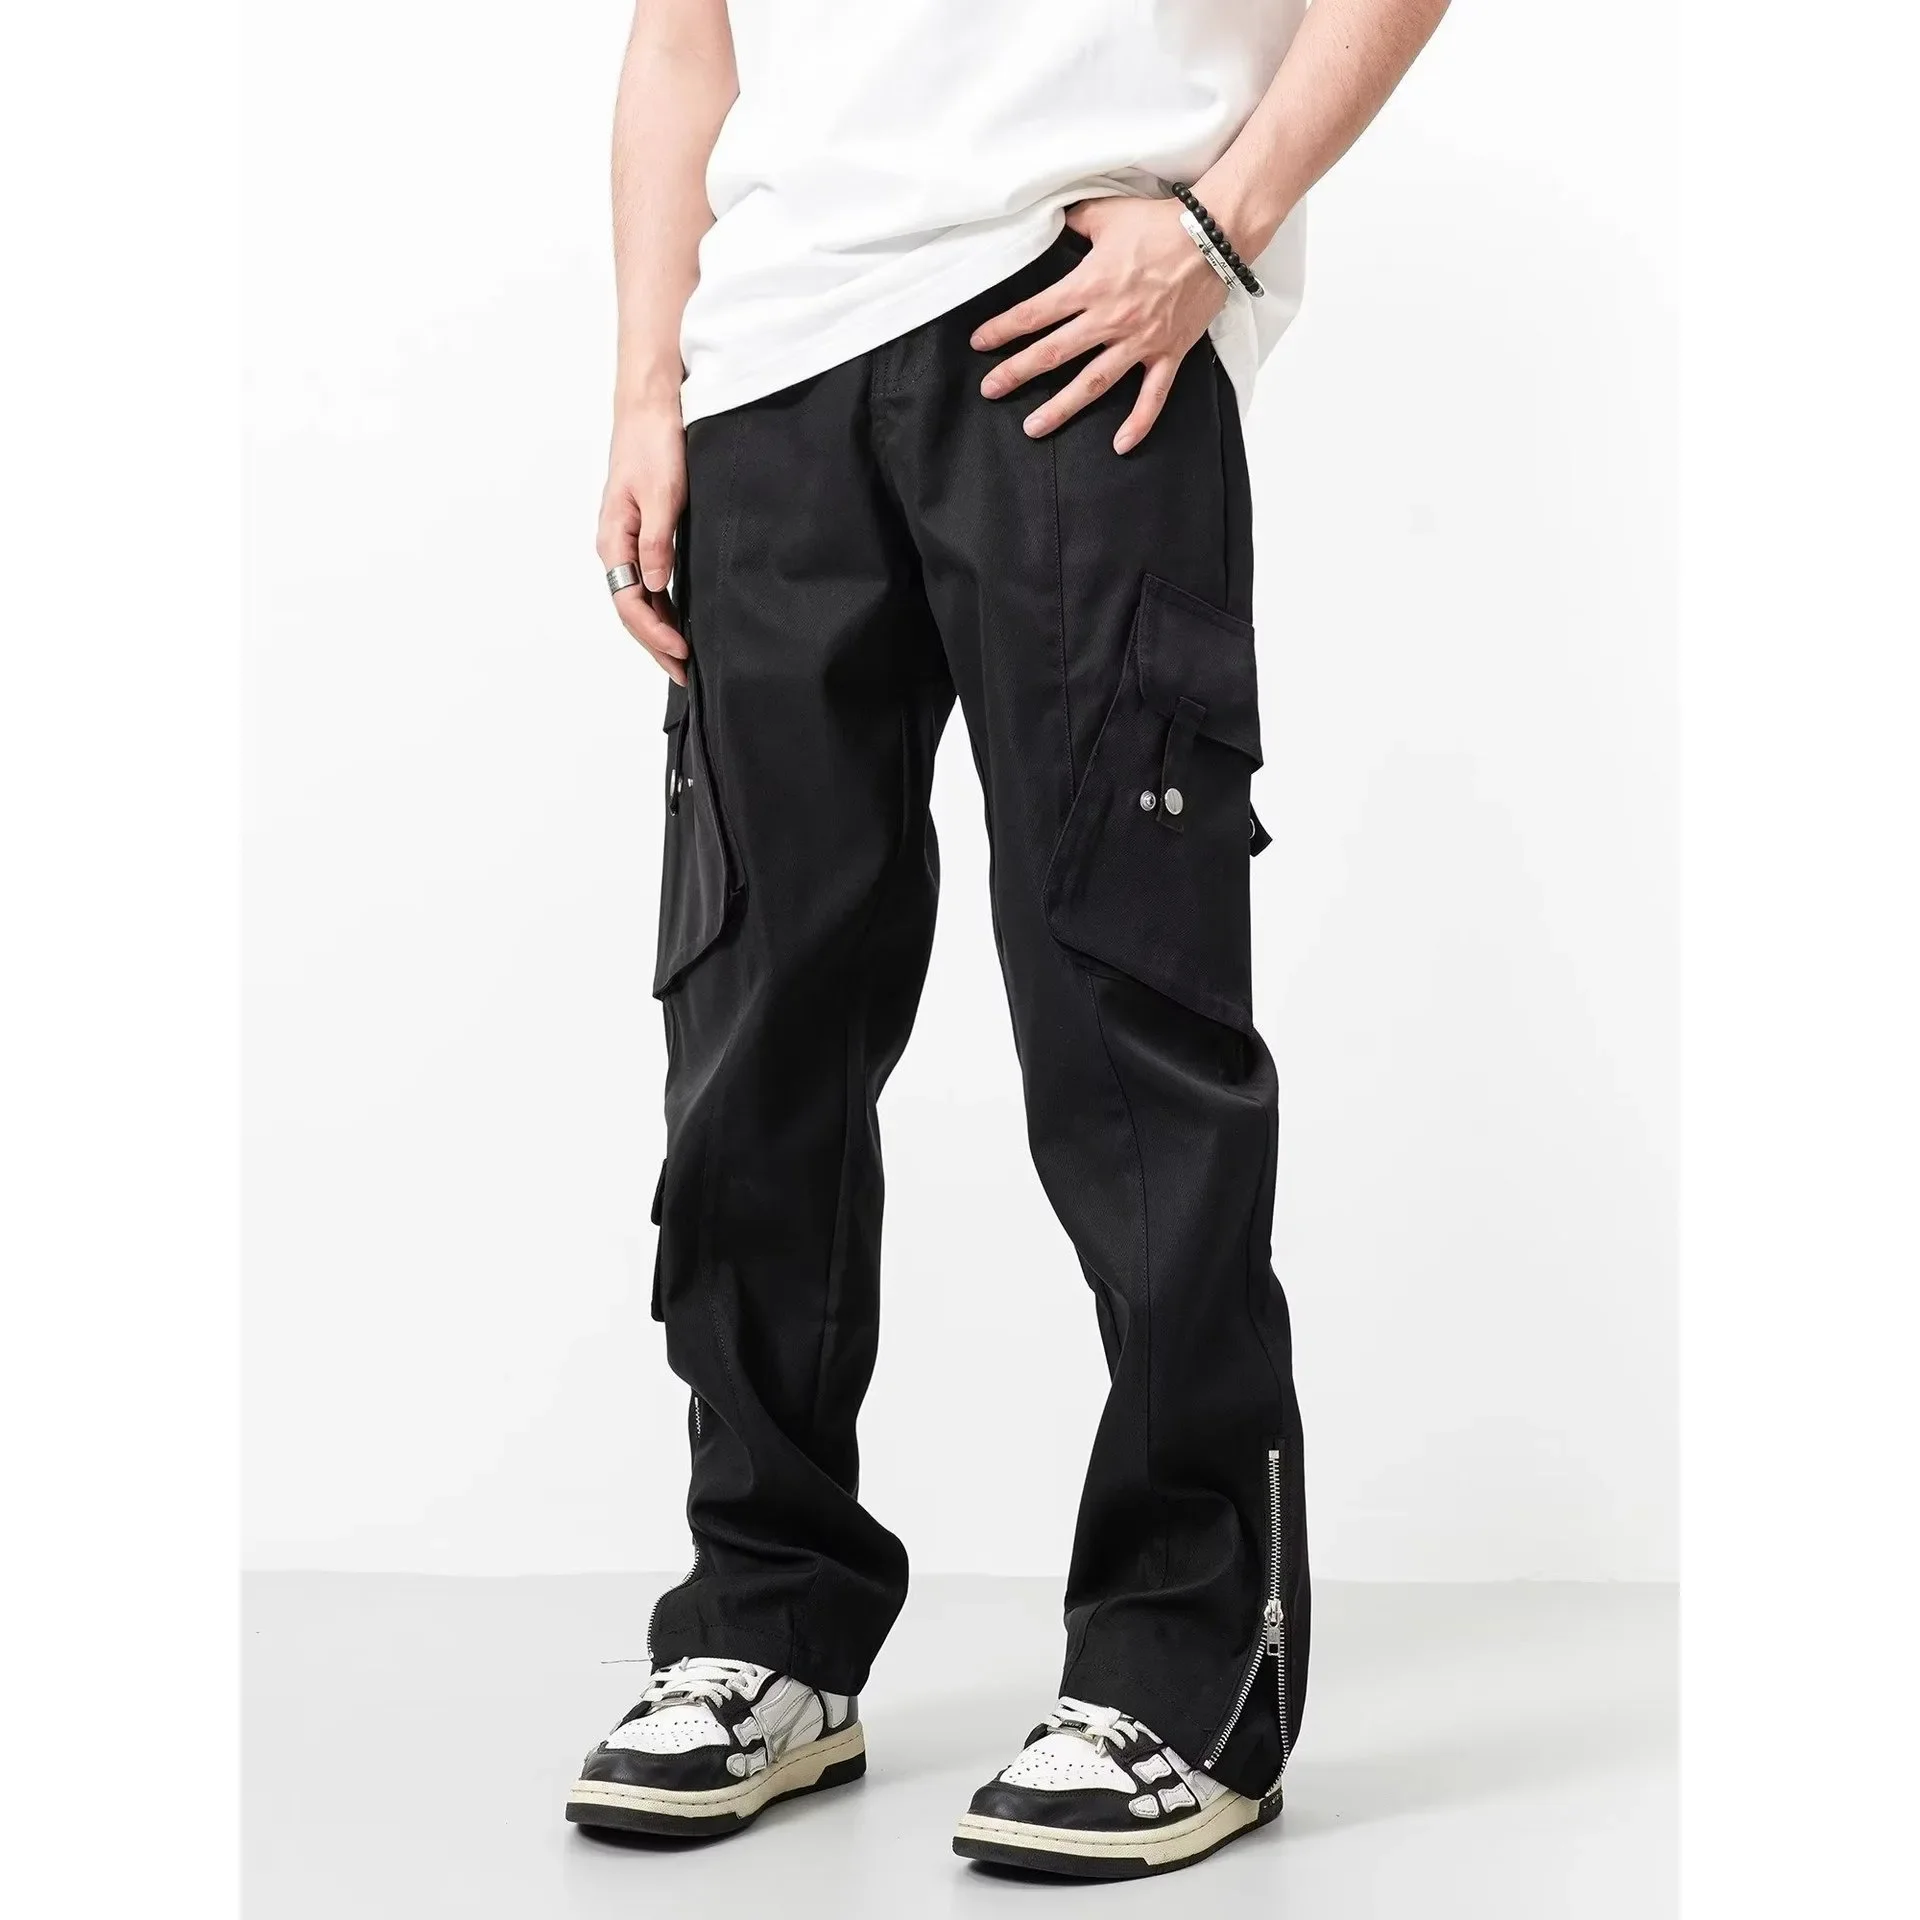 

Baggy Straight-Legged American-style Work Pants for Men Trendy Wide-Legged Casual Long Trousers for Spring Sport Men Clothing